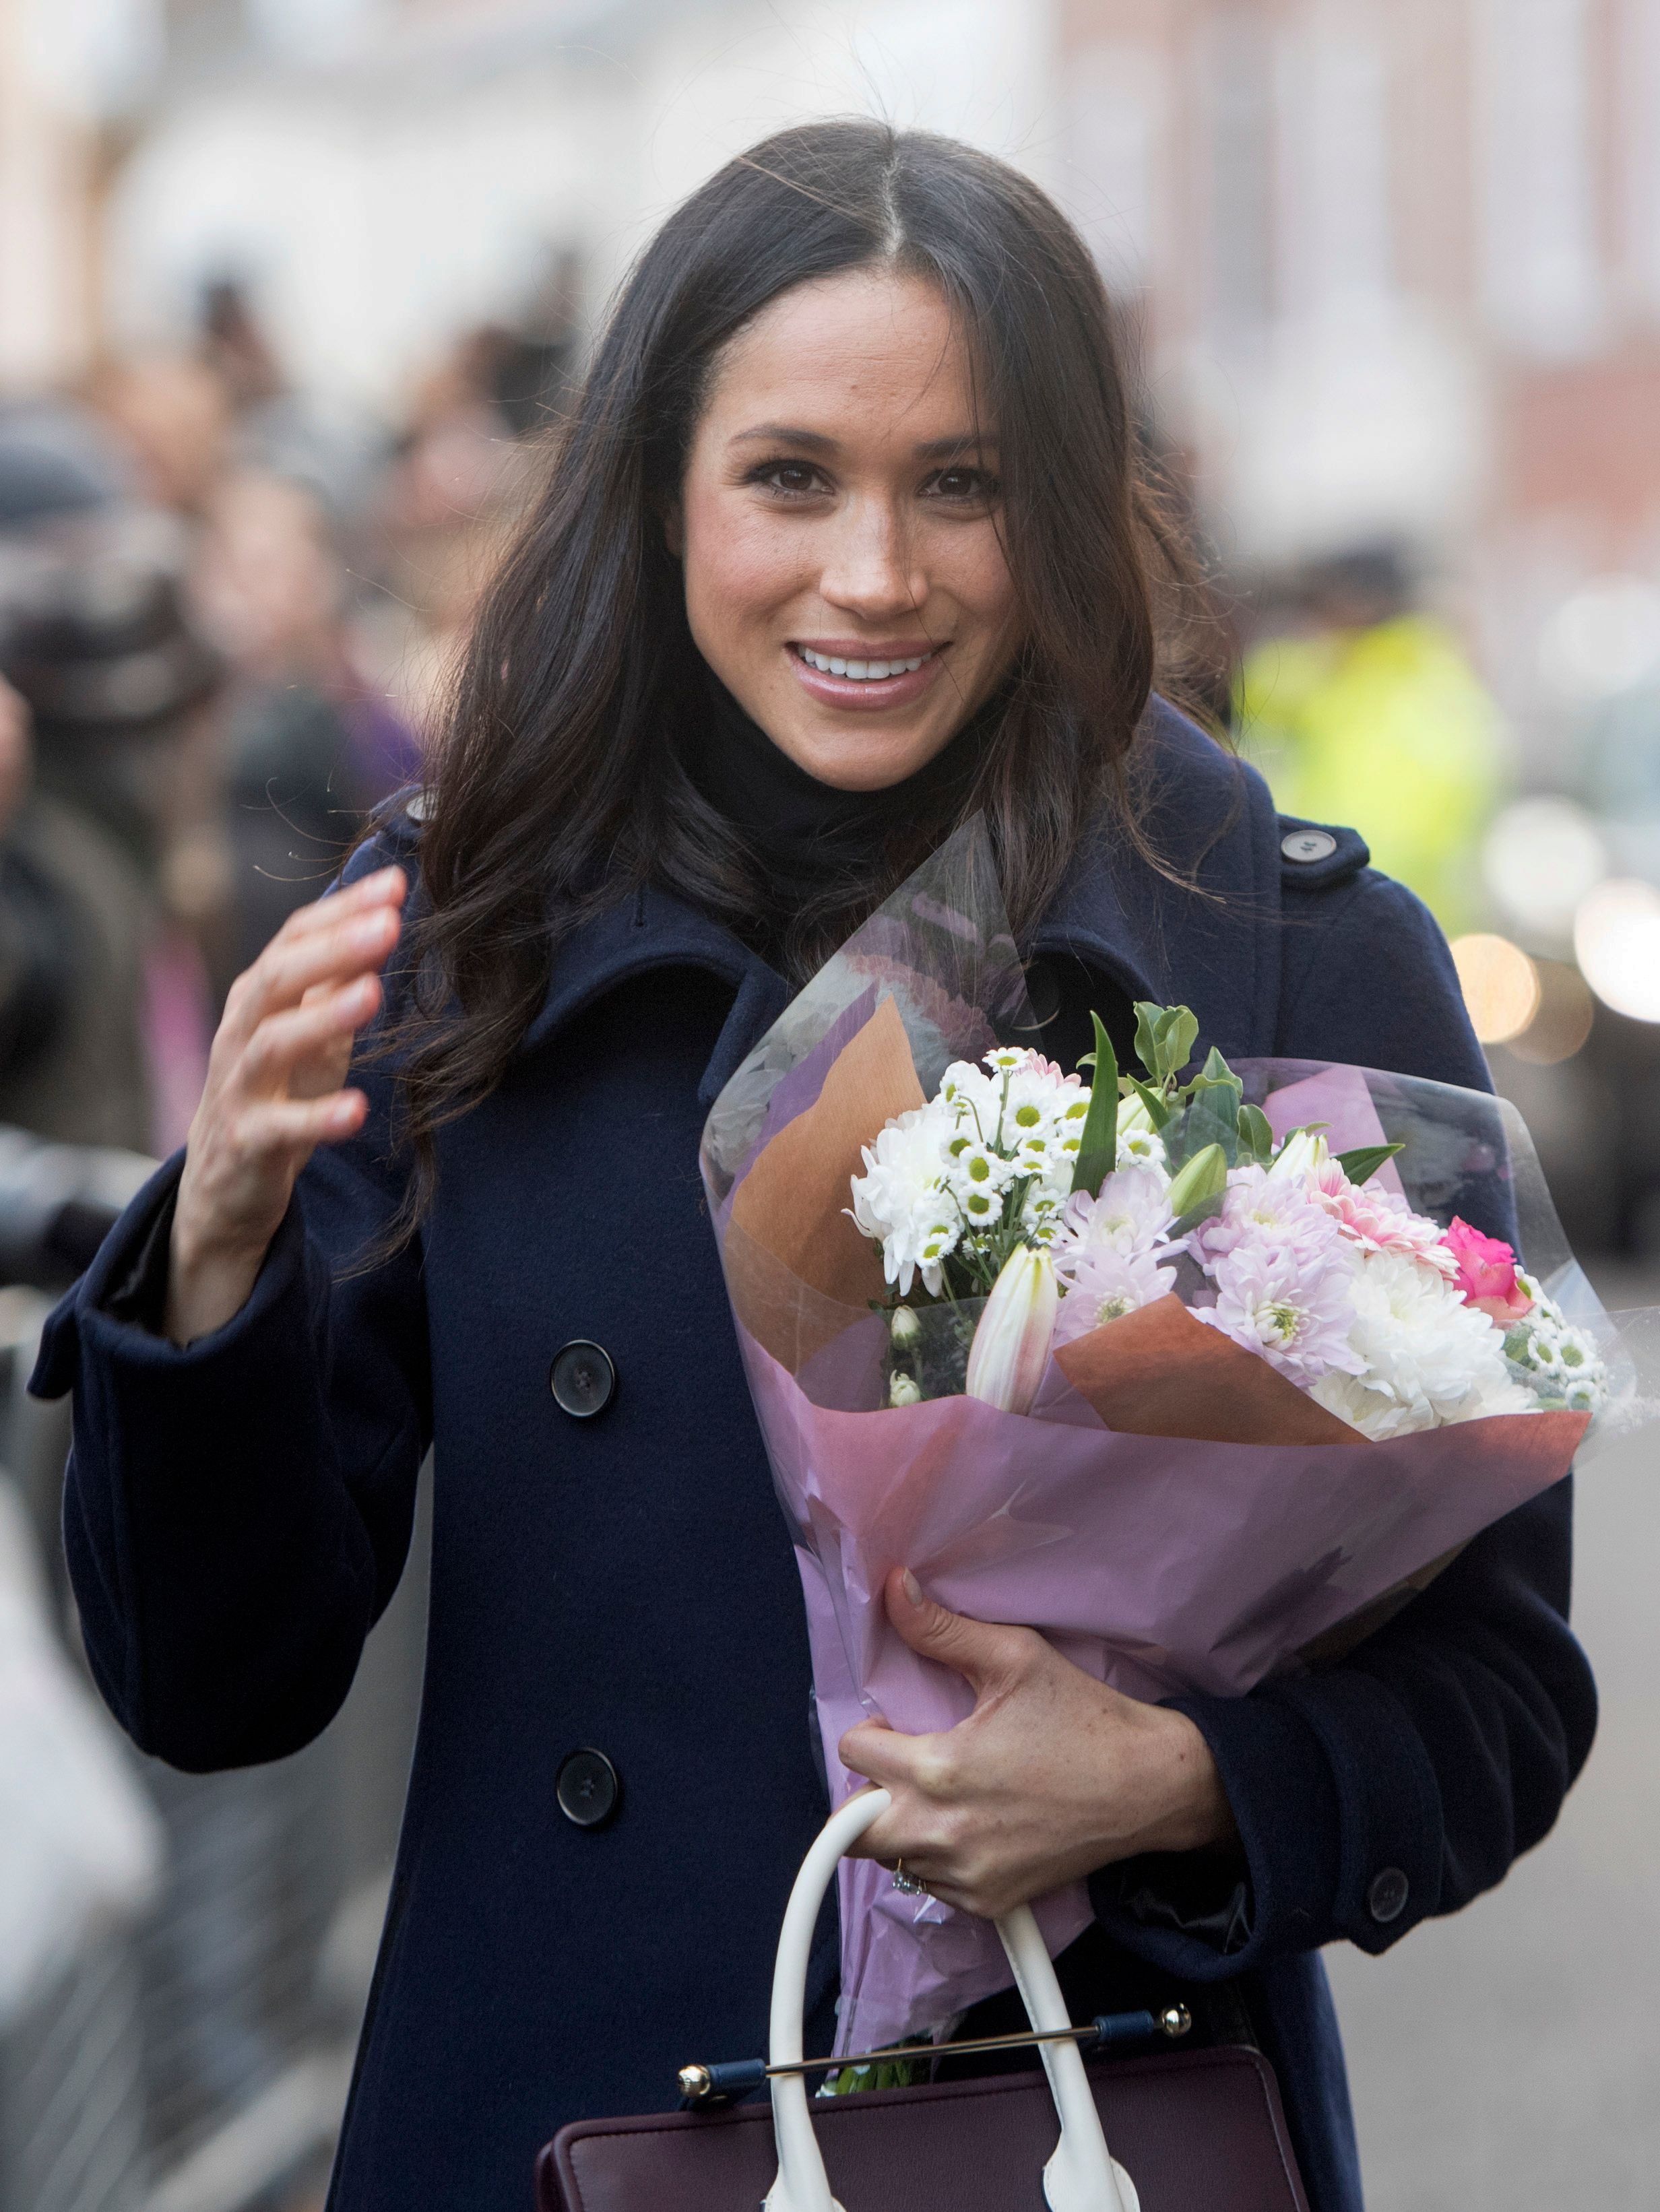 Meghan Markle greets wellwishers on a walkabout as they arrive for an engagement at Nottingham Contemporary in Nottingham, central England, on December 1, 2017, which is hosting a Terrence Higgins Trust World AIDS Day charity fair. | Source: Getty Images